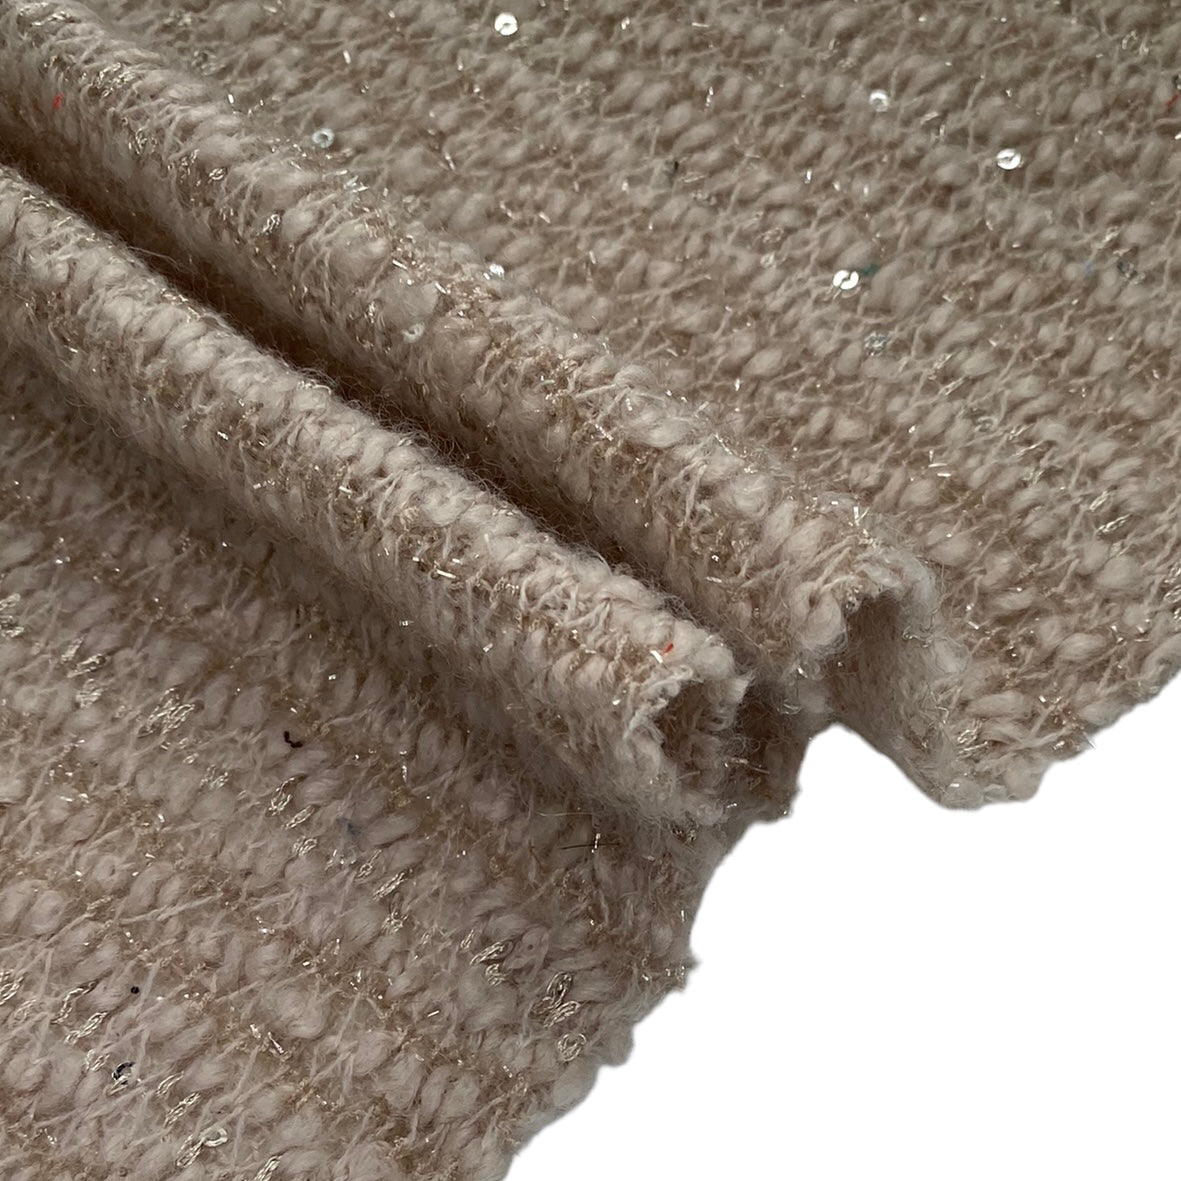 Wool Blend Boucle Knit with Sequins - Beige